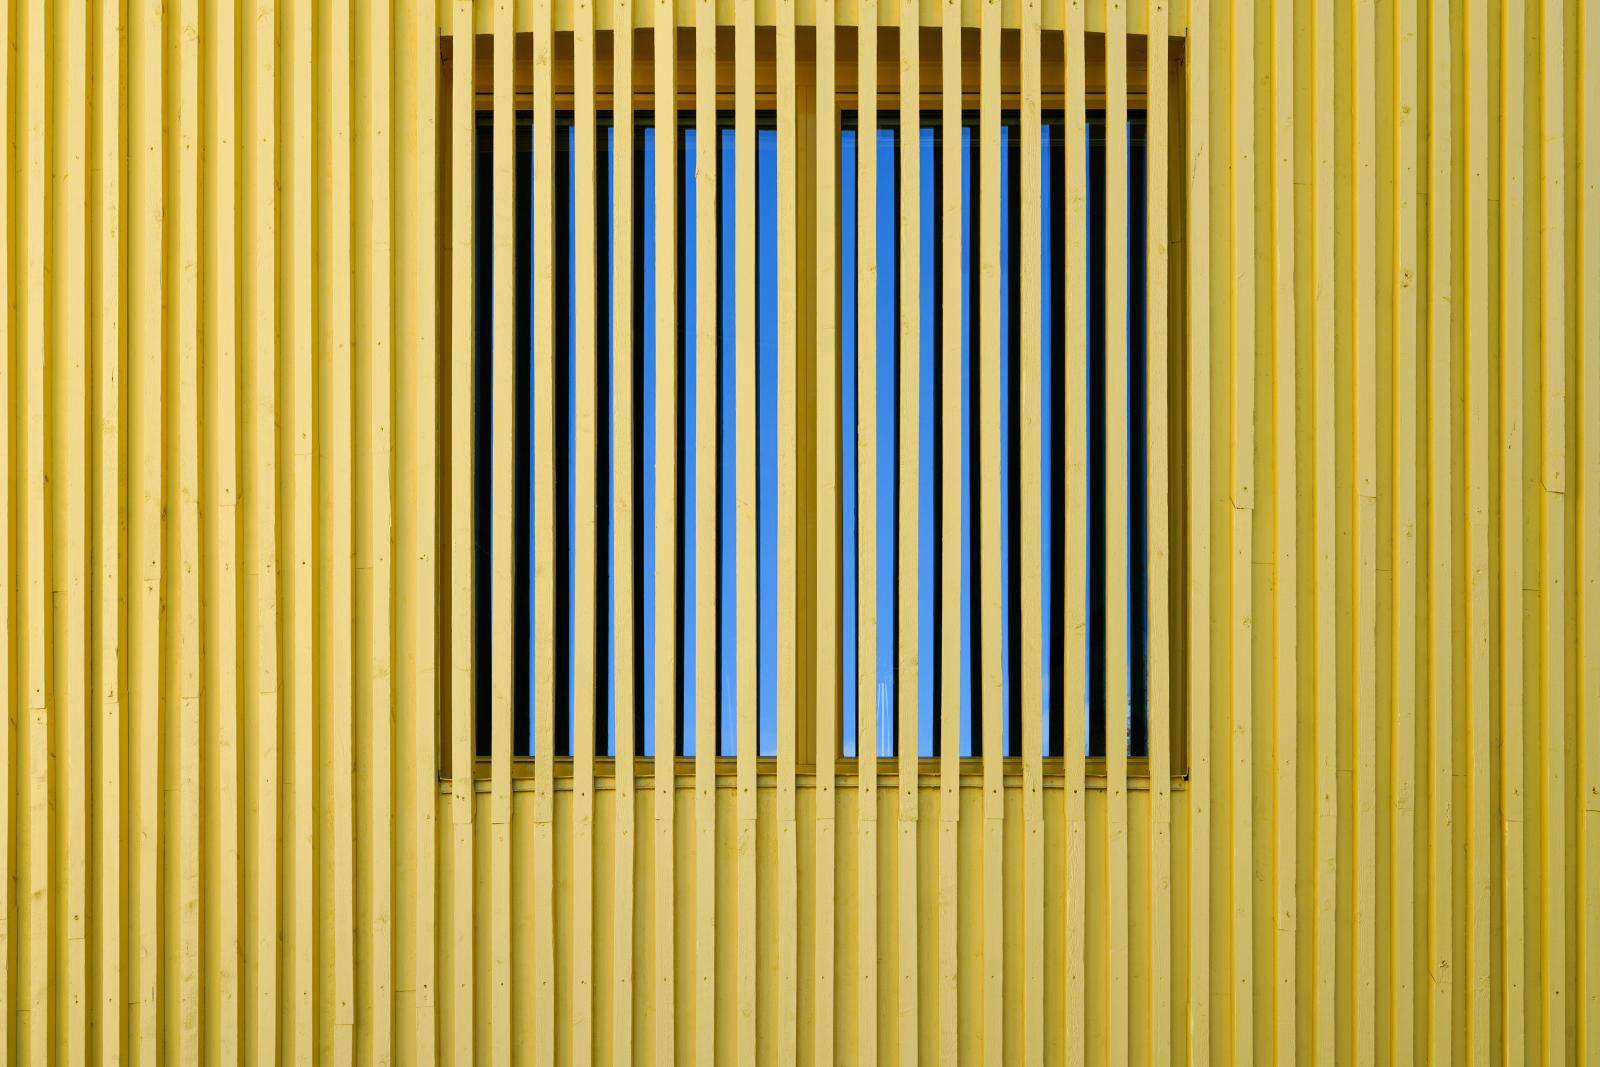 A Glympe of Light: Yellow painted Wood meets blue Sky | Buy this image